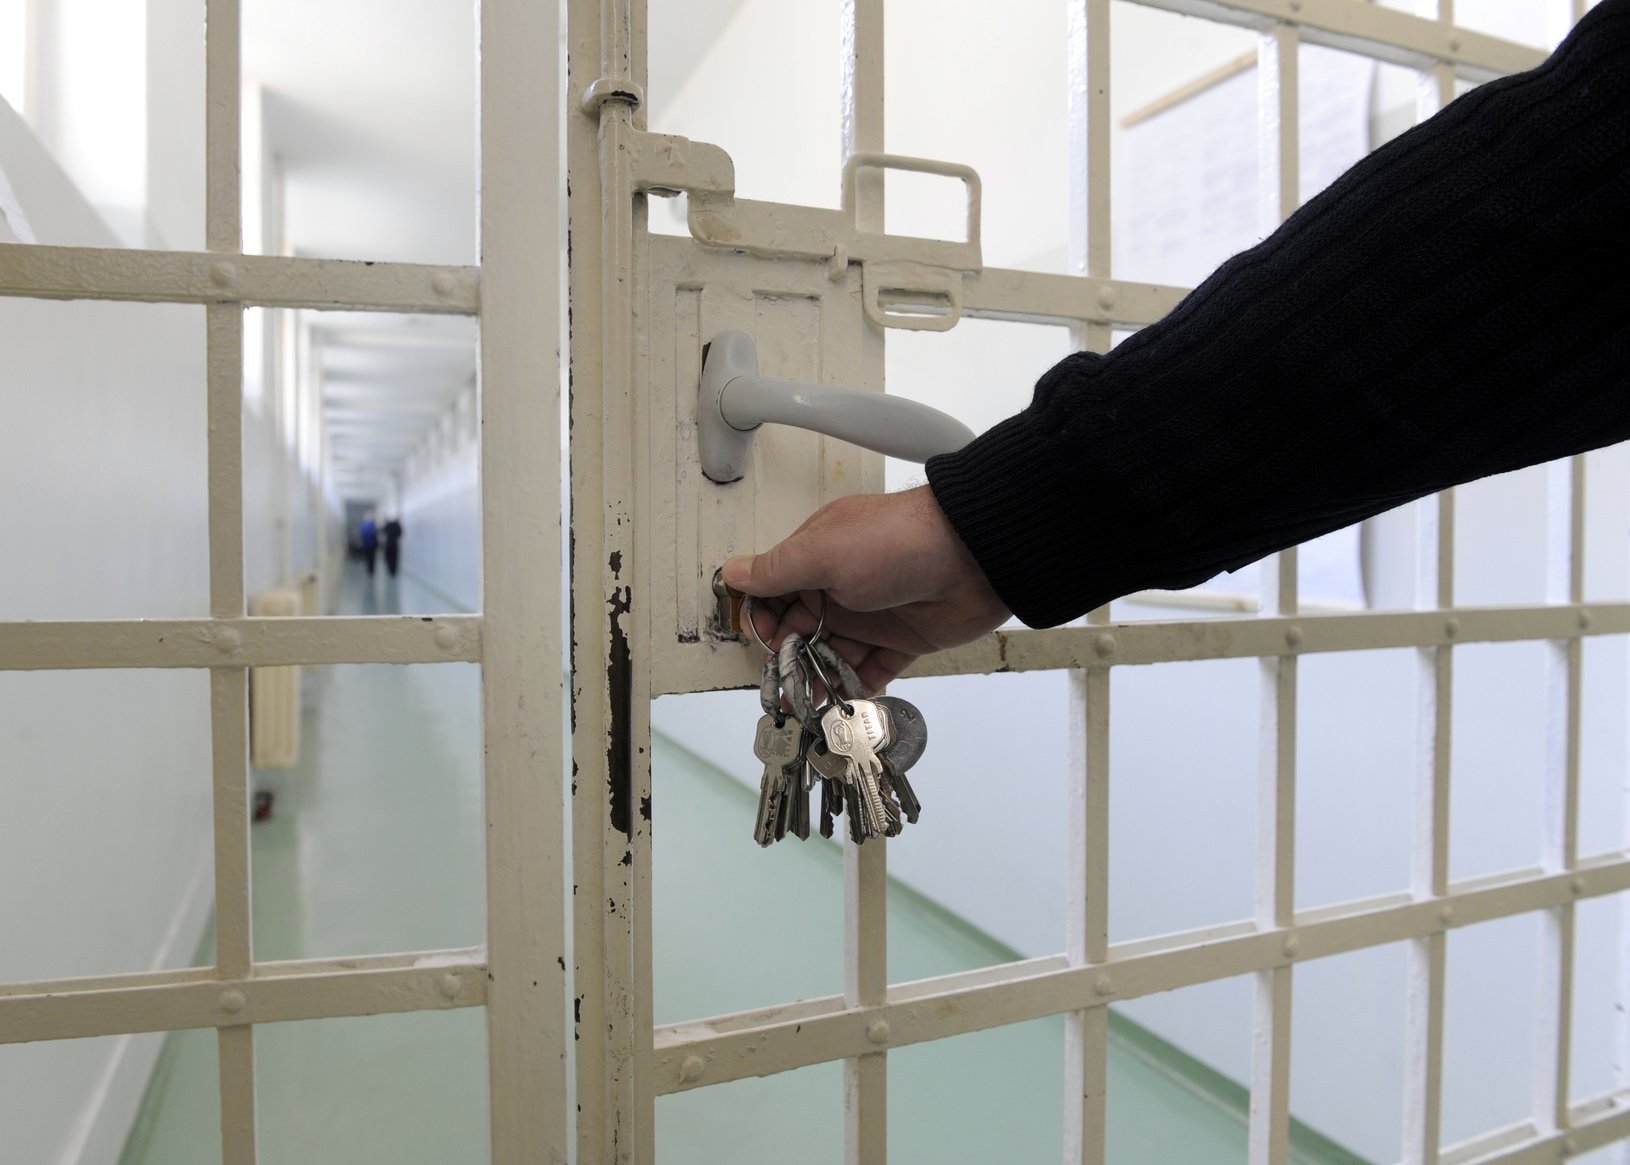 in order to become a prison officer, you must be able to keep discipline and order in prisons